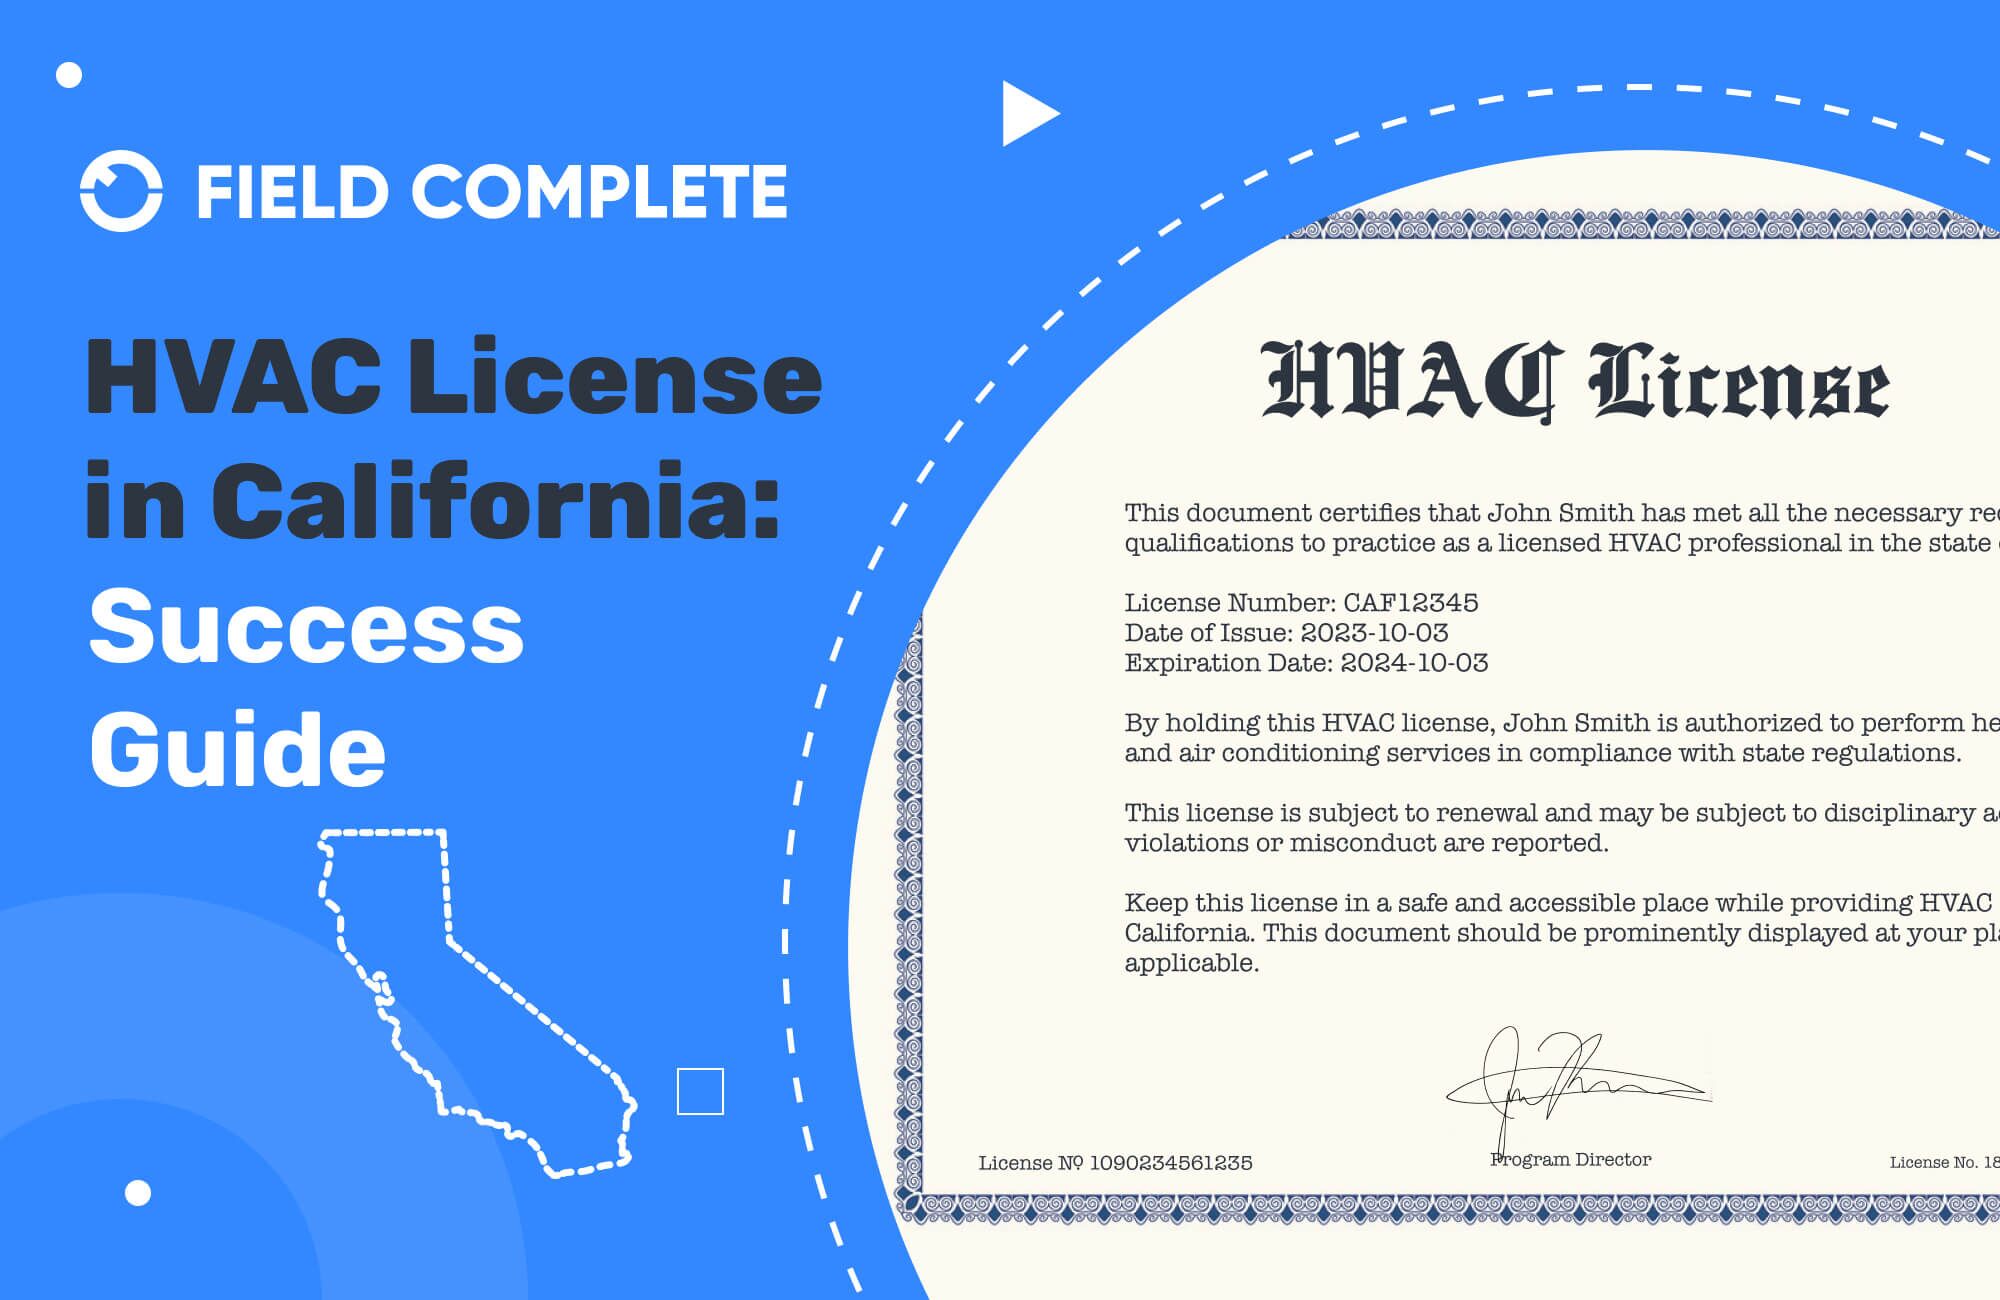 Your Comprehensive Guide to Successfully Obtaining an HVAC License in California